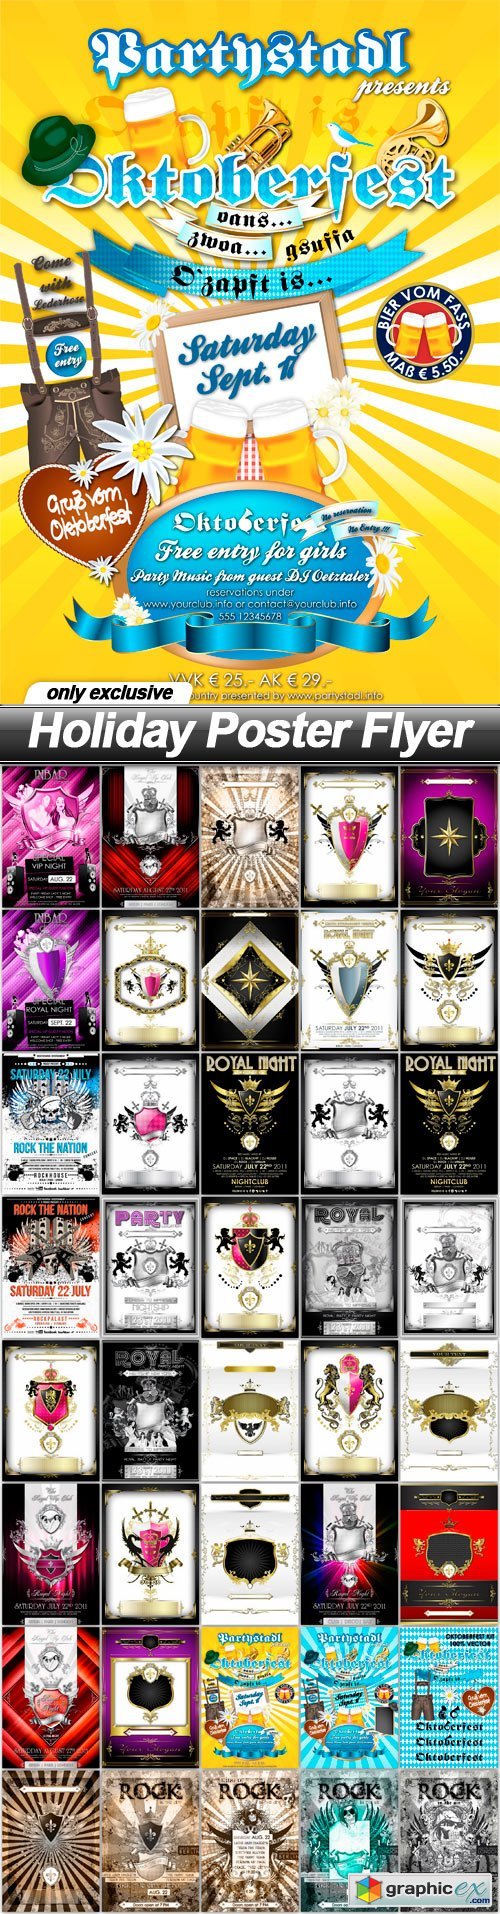 Holiday Poster Flyer - 40 EPS